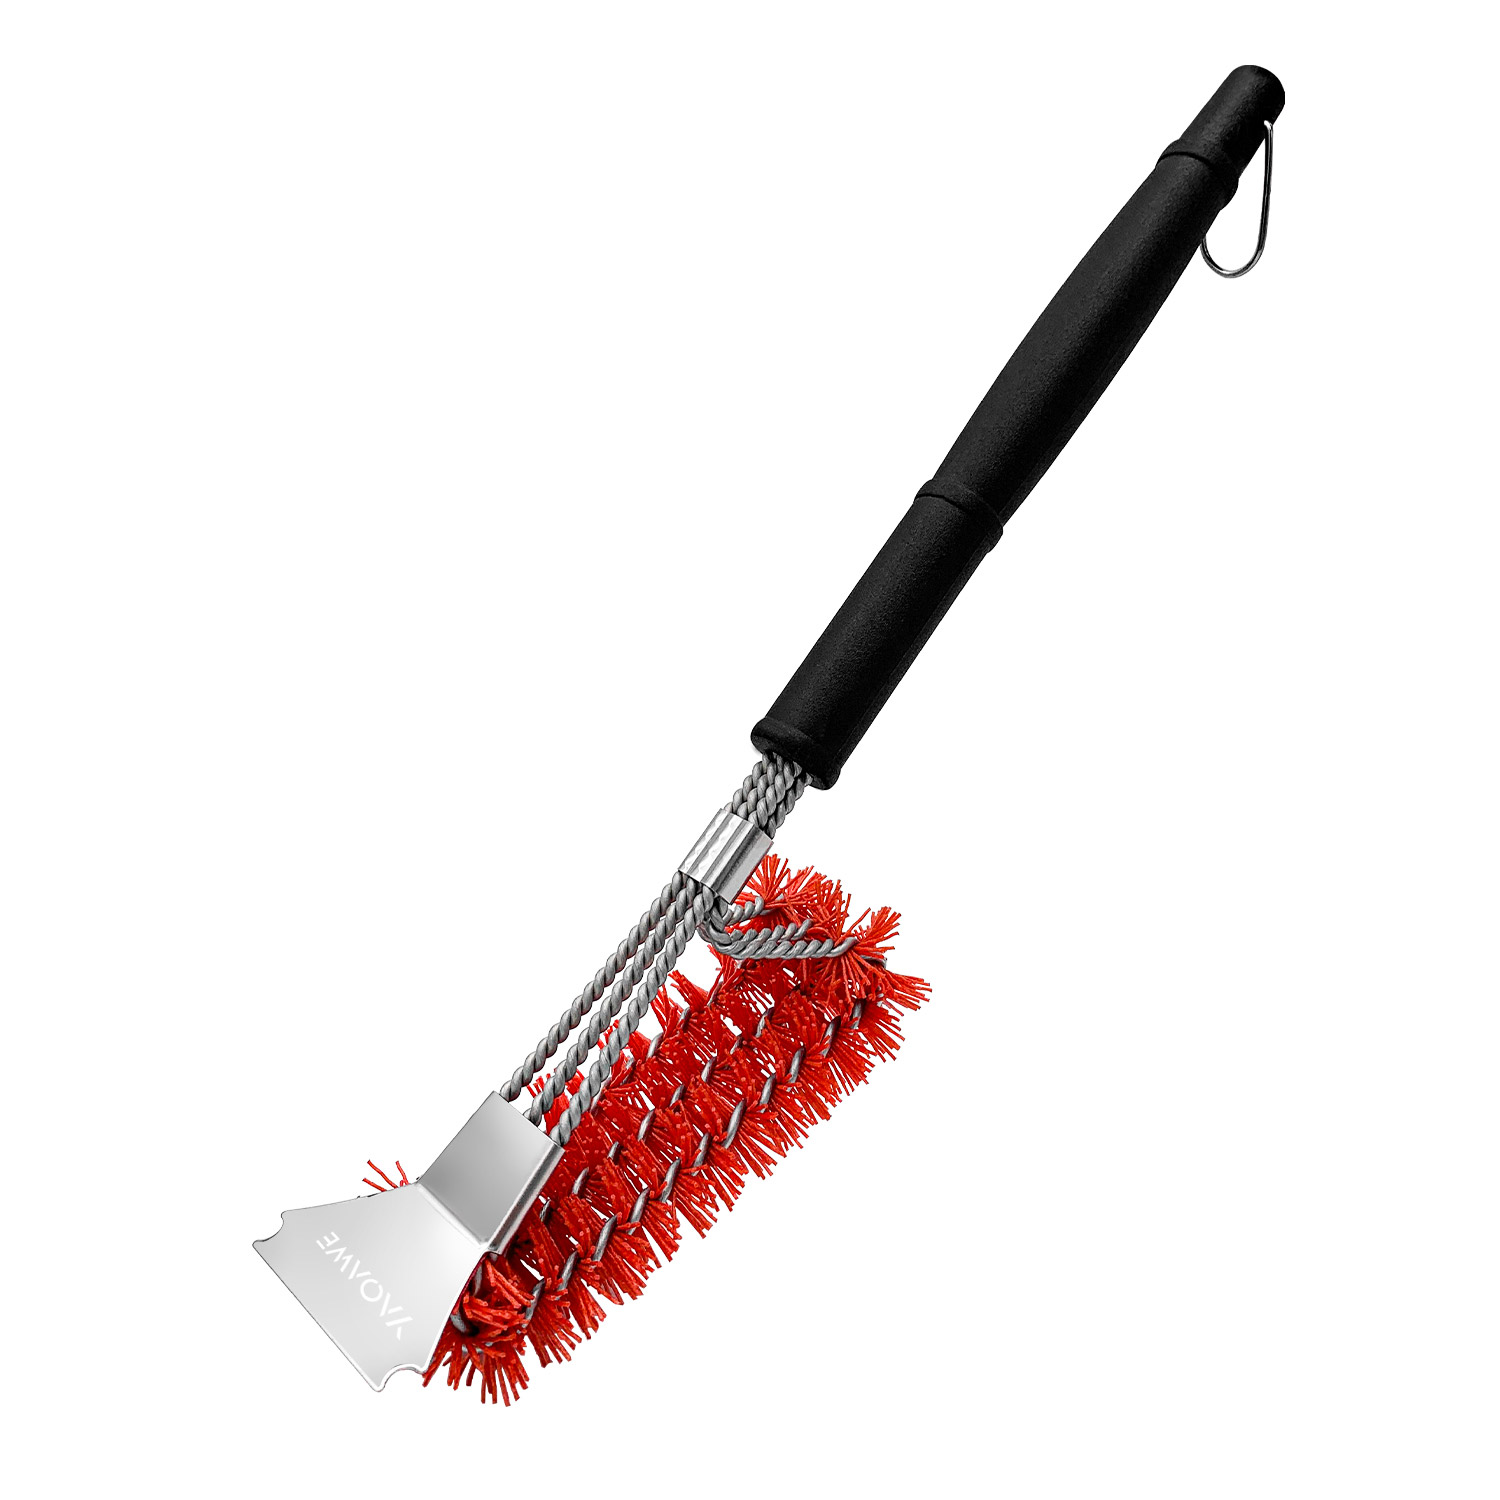 Nylon Grill Brush for Porcelain Grates, Clean Grill Brush for a Cool Grill-YAOAWE